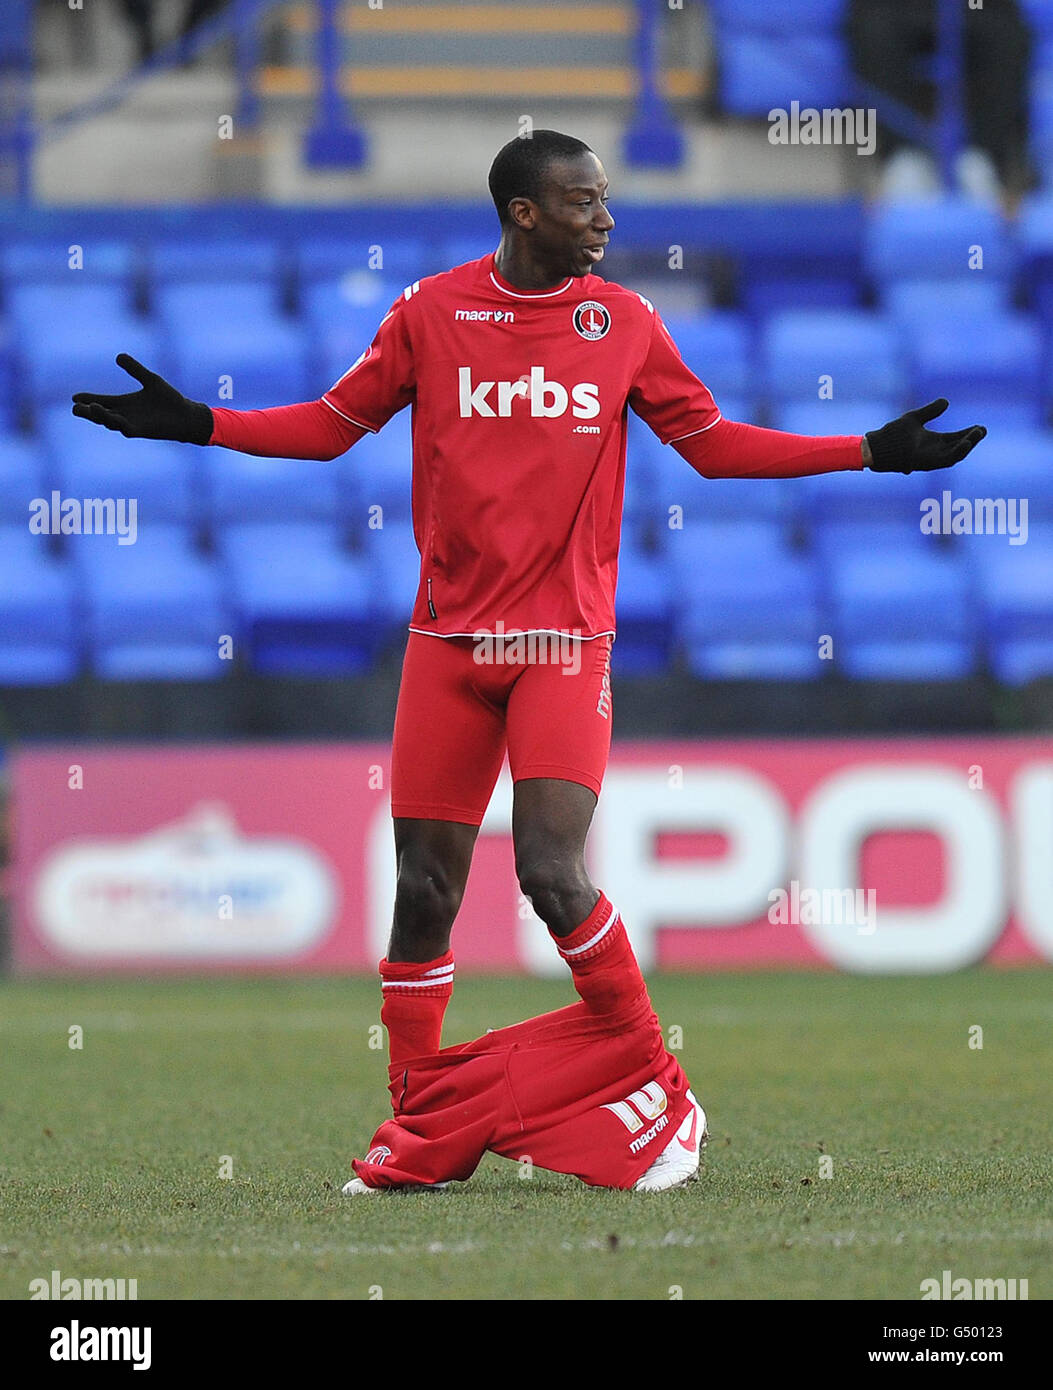 Football - npower football League One - Tranmere Rovers / Charlton Athletic - Prenton Park.Bradley Wright-Phillips de Charlton Athletic perd son short lors du match de npower football League One à Prenton Park, Wirral. Banque D'Images